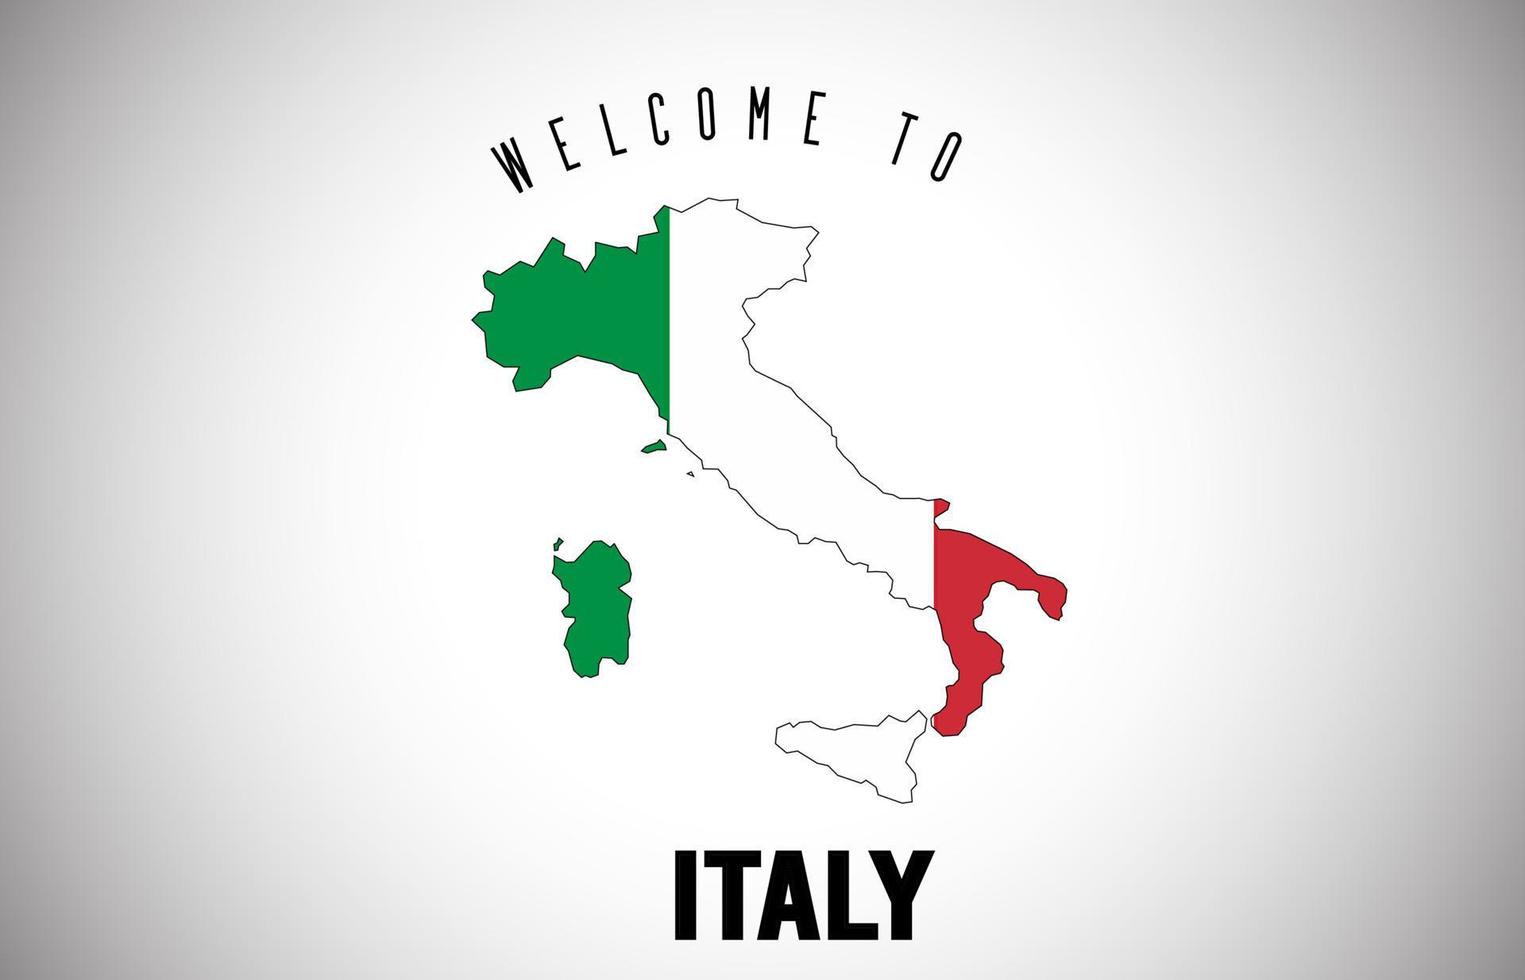 Italy Welcome to Text and Country flag inside Country border Map Vector Design.